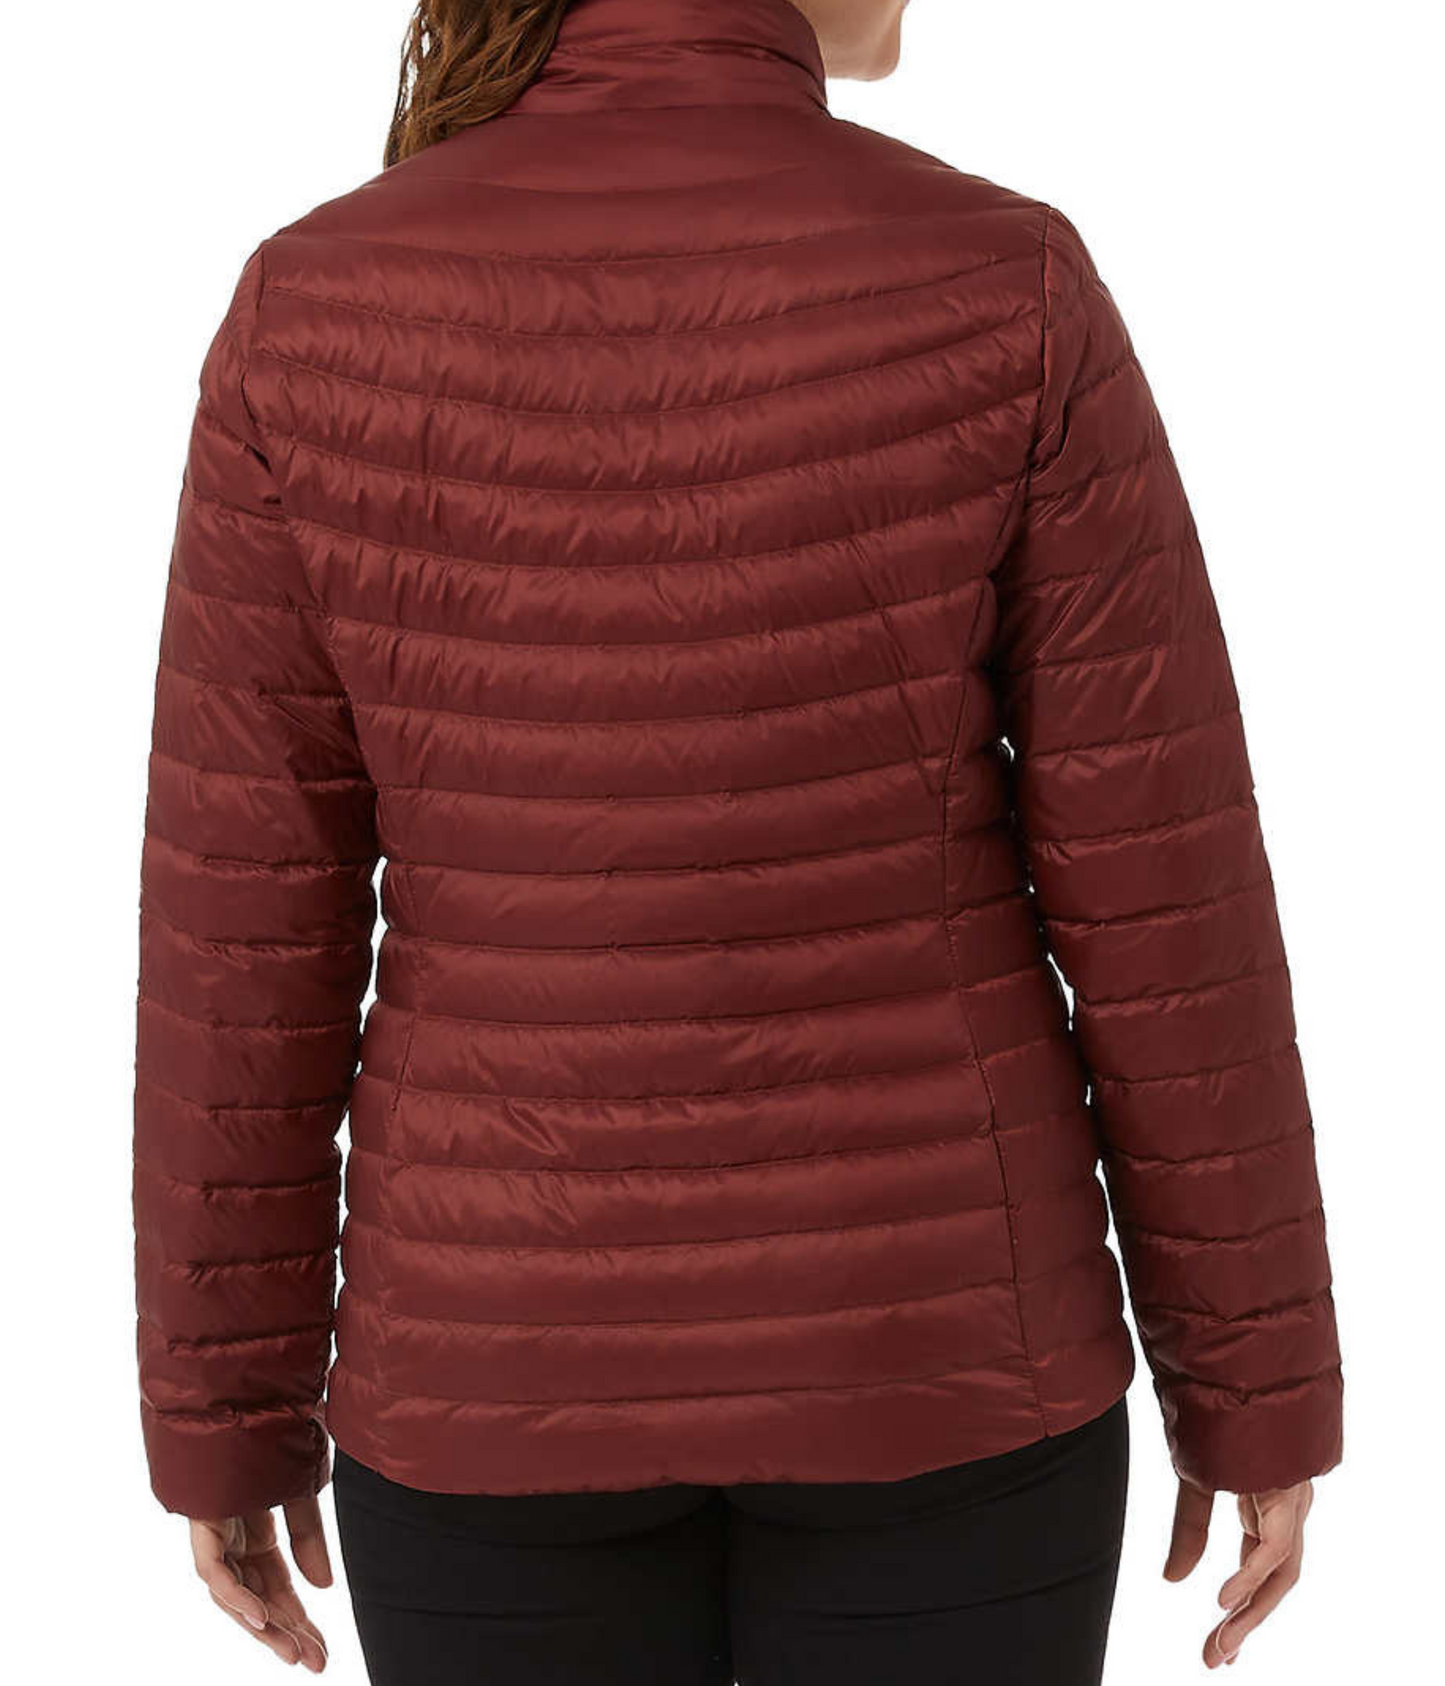 Proud Passionista Ultra-Light Down Jacket